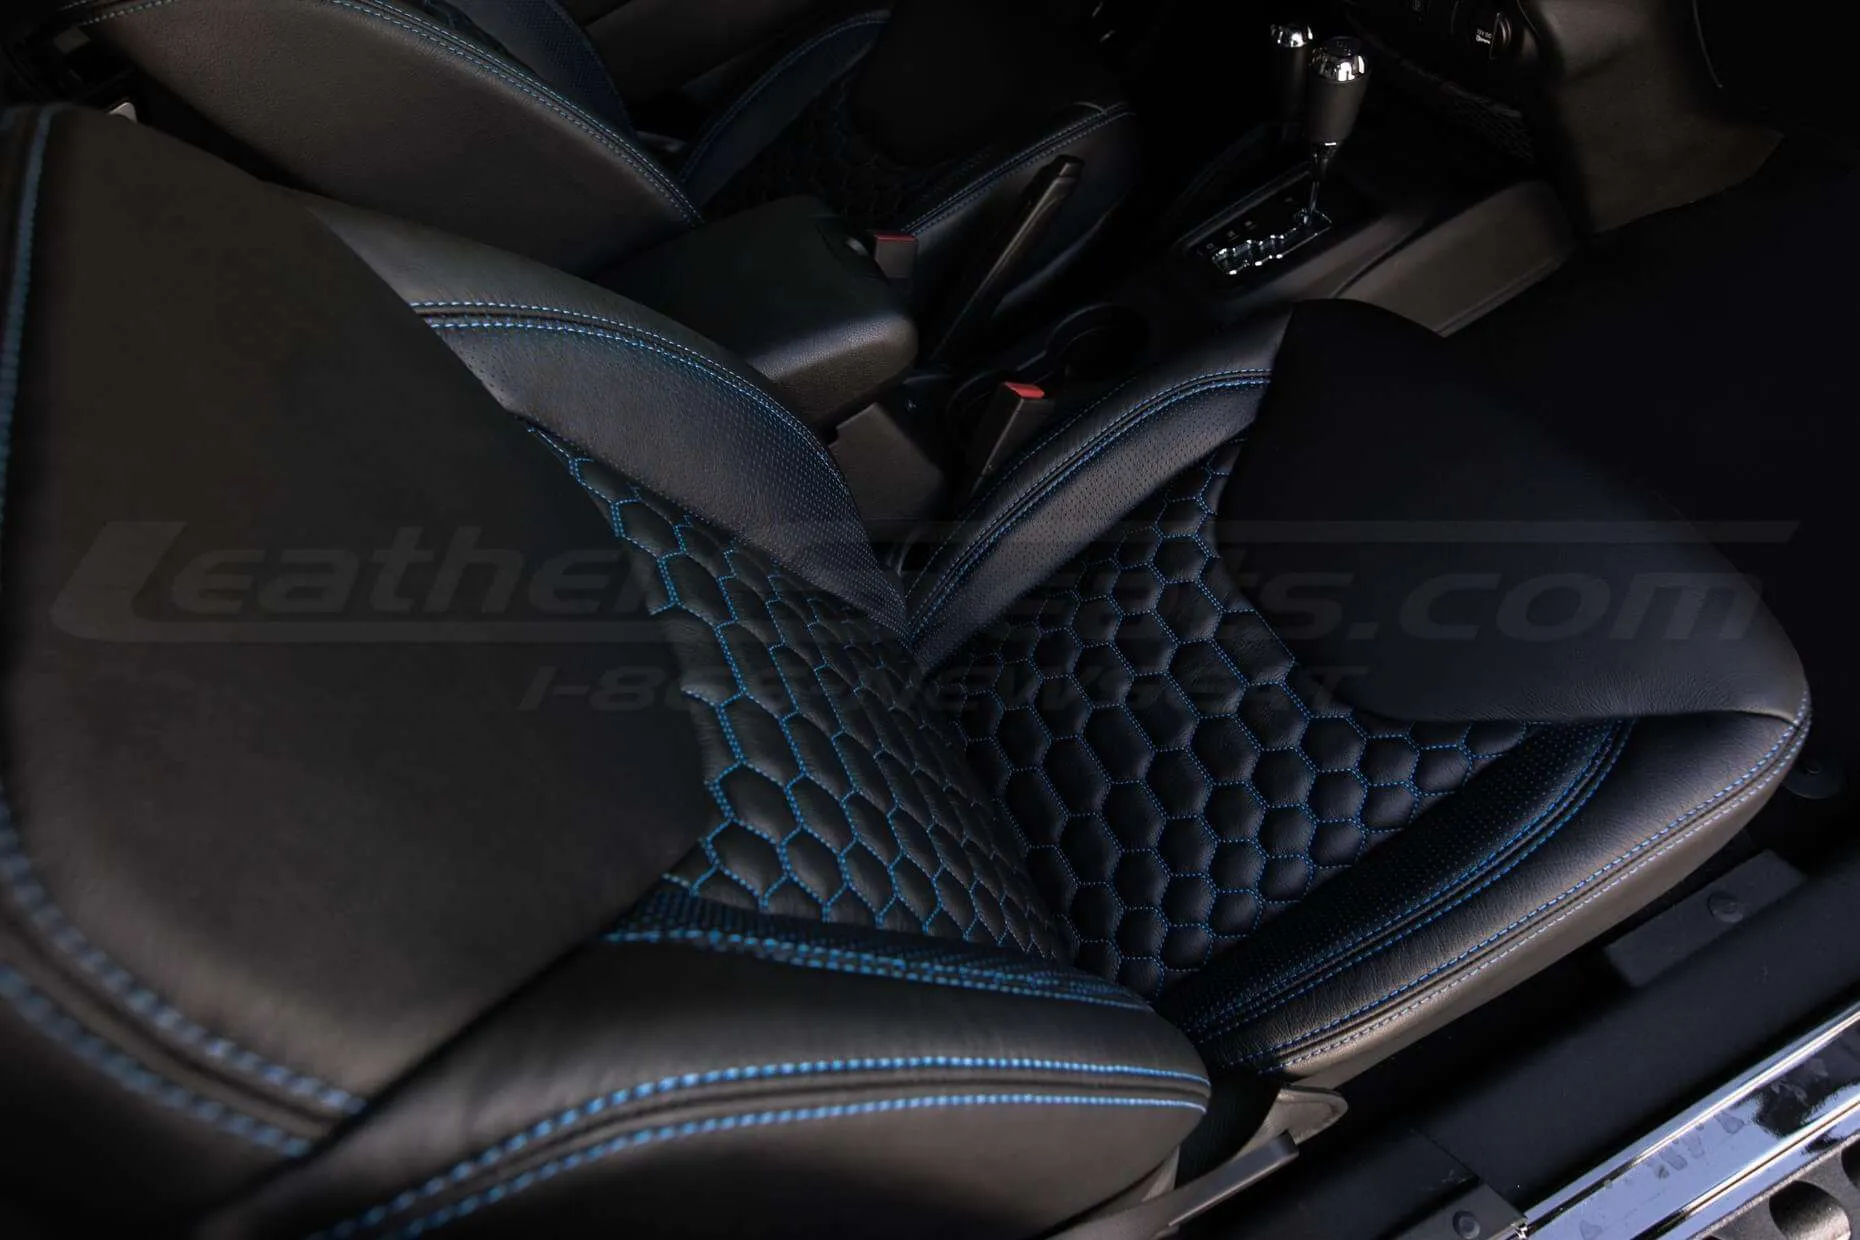 2013-2018 Jeep Wrangler Bespoked Leather Seats Installed- Black & Cobalt - Front passenger seat top-down view